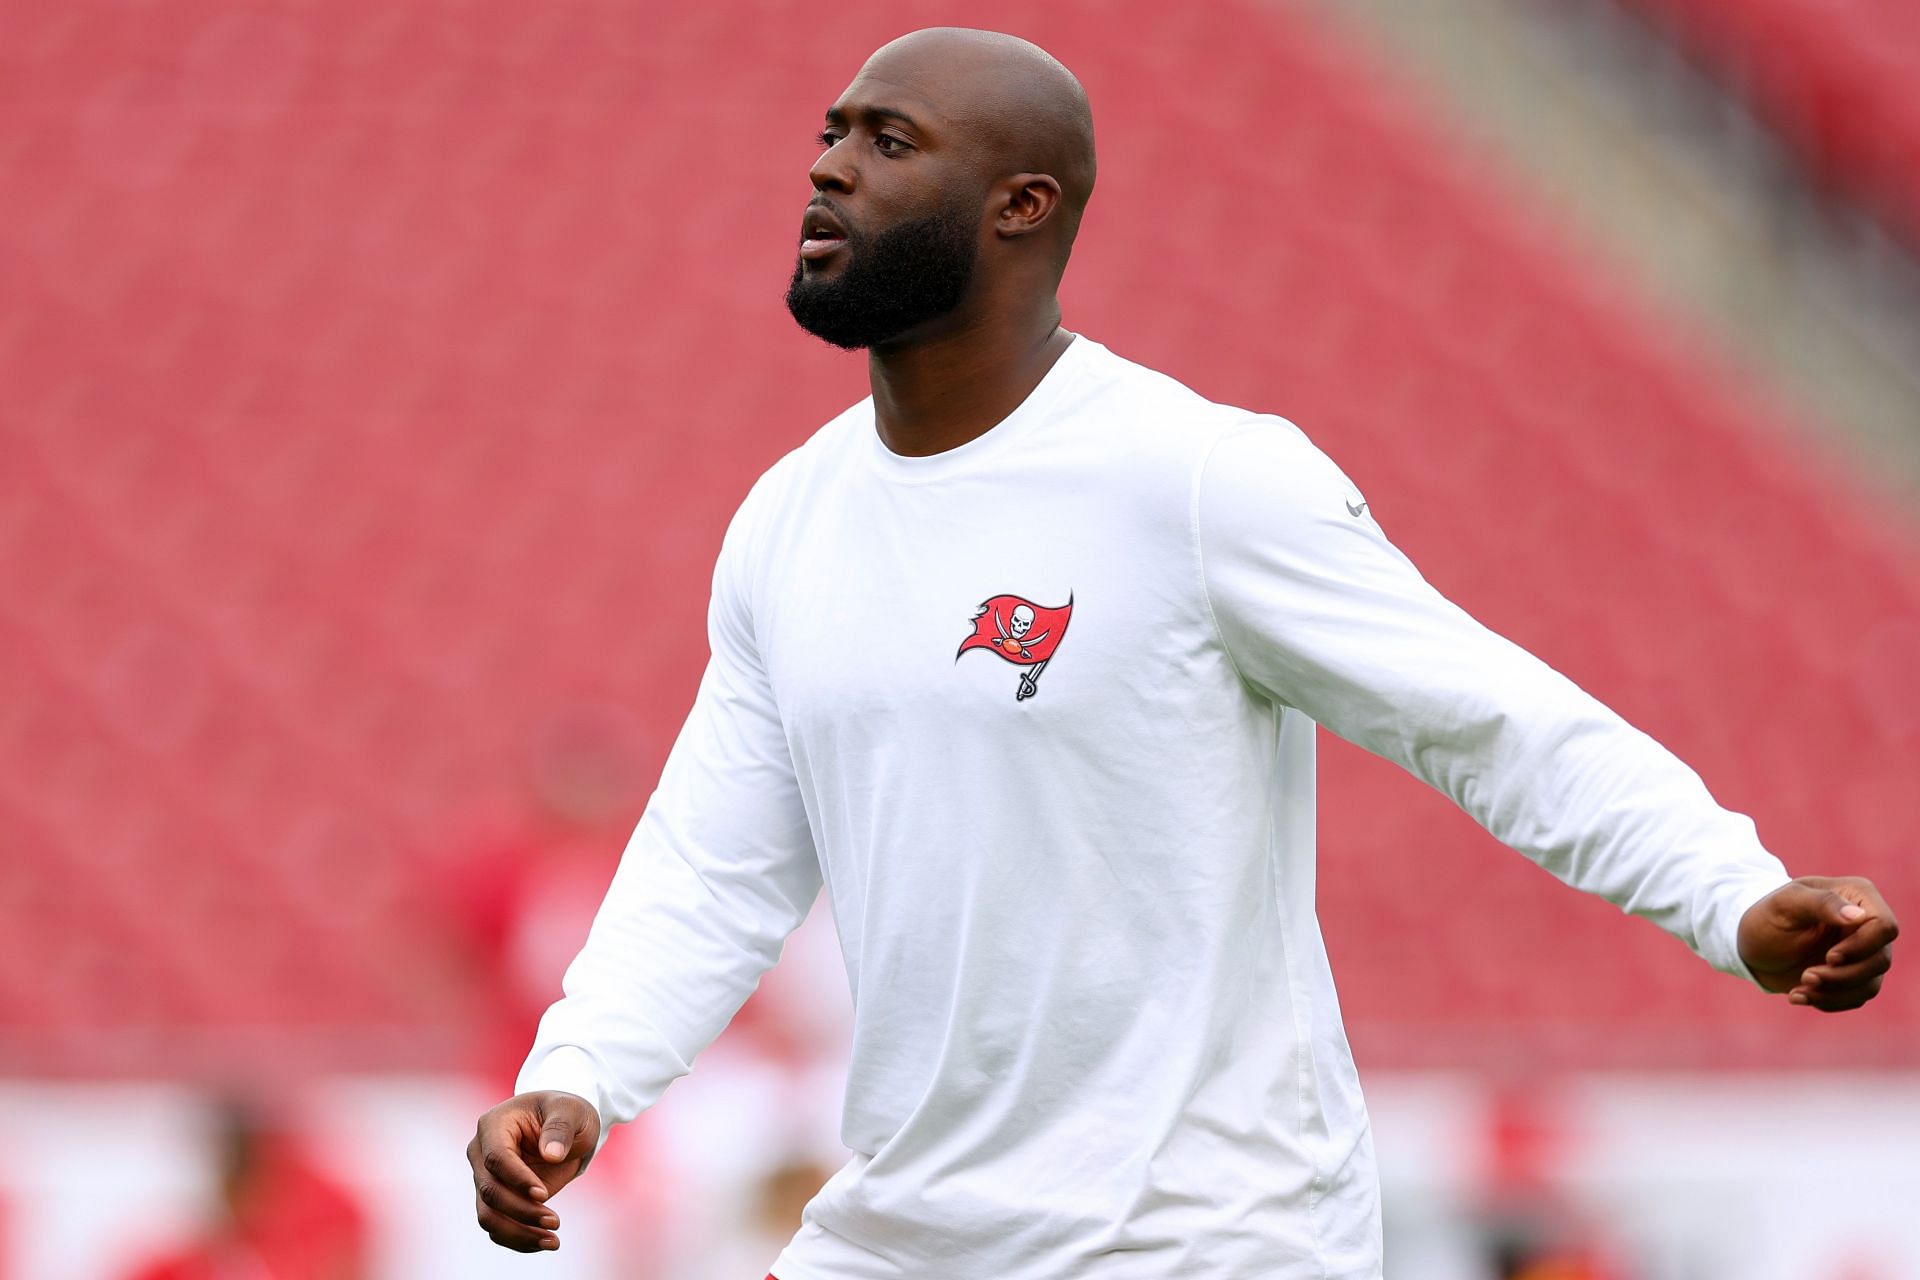 Leonard Fournette making most of 2nd chance with Buccaneers